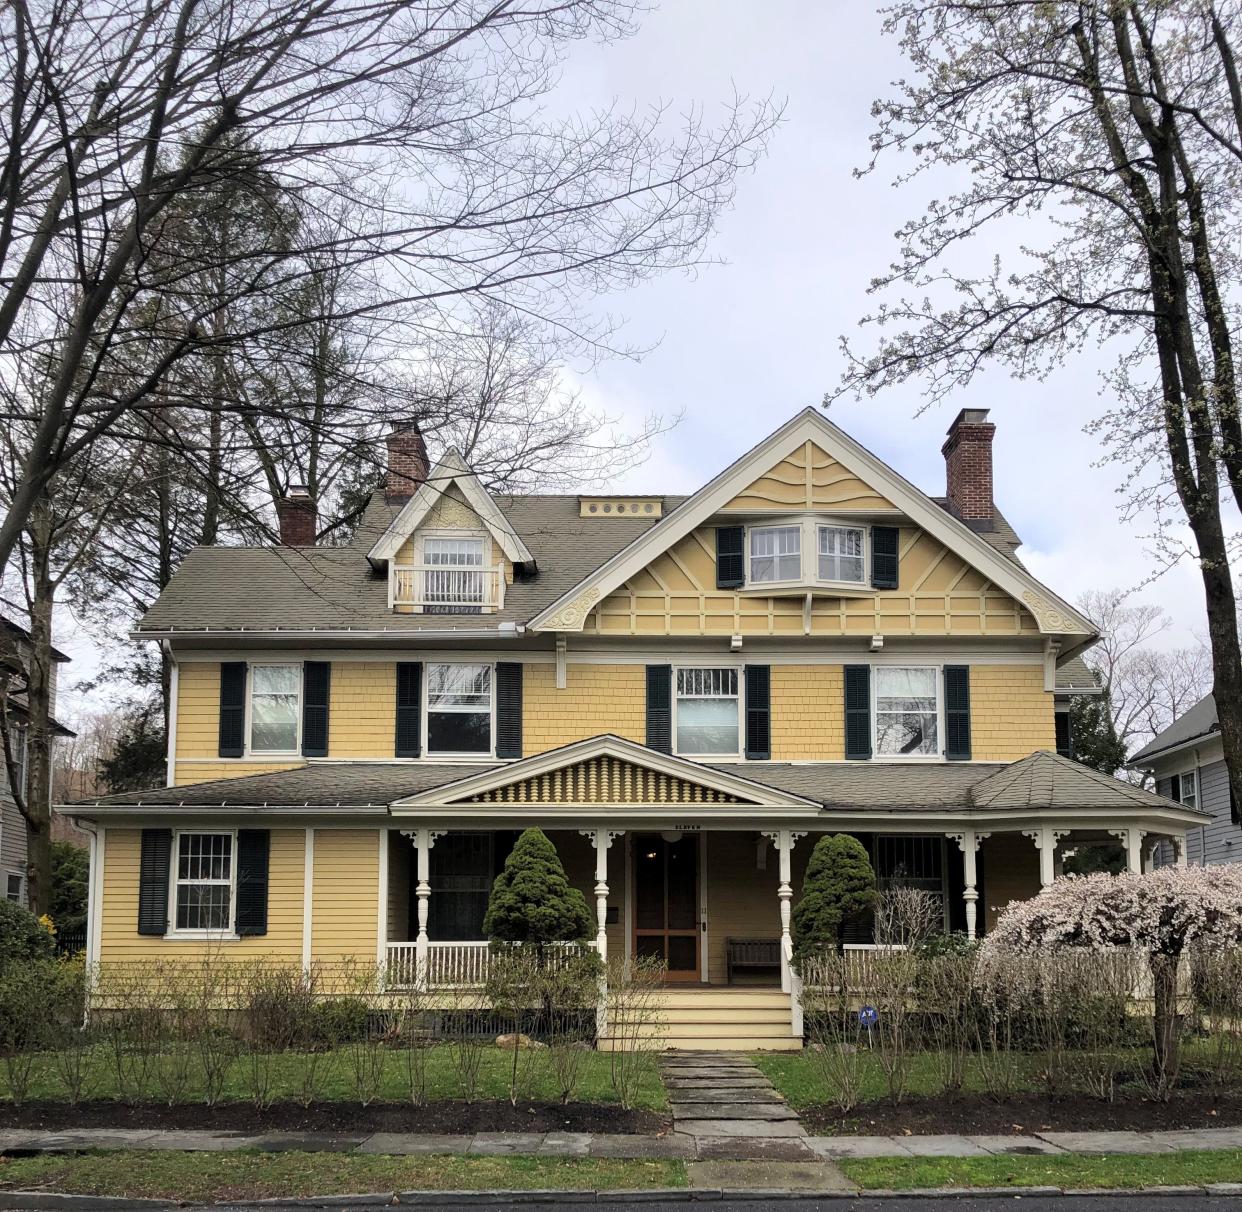 This year's featured home is a Queen Anne-style Victorian home, located one block from Macculloch Hall, which was used as the set for Meryl Streep's 1998 film, "One True Thing."